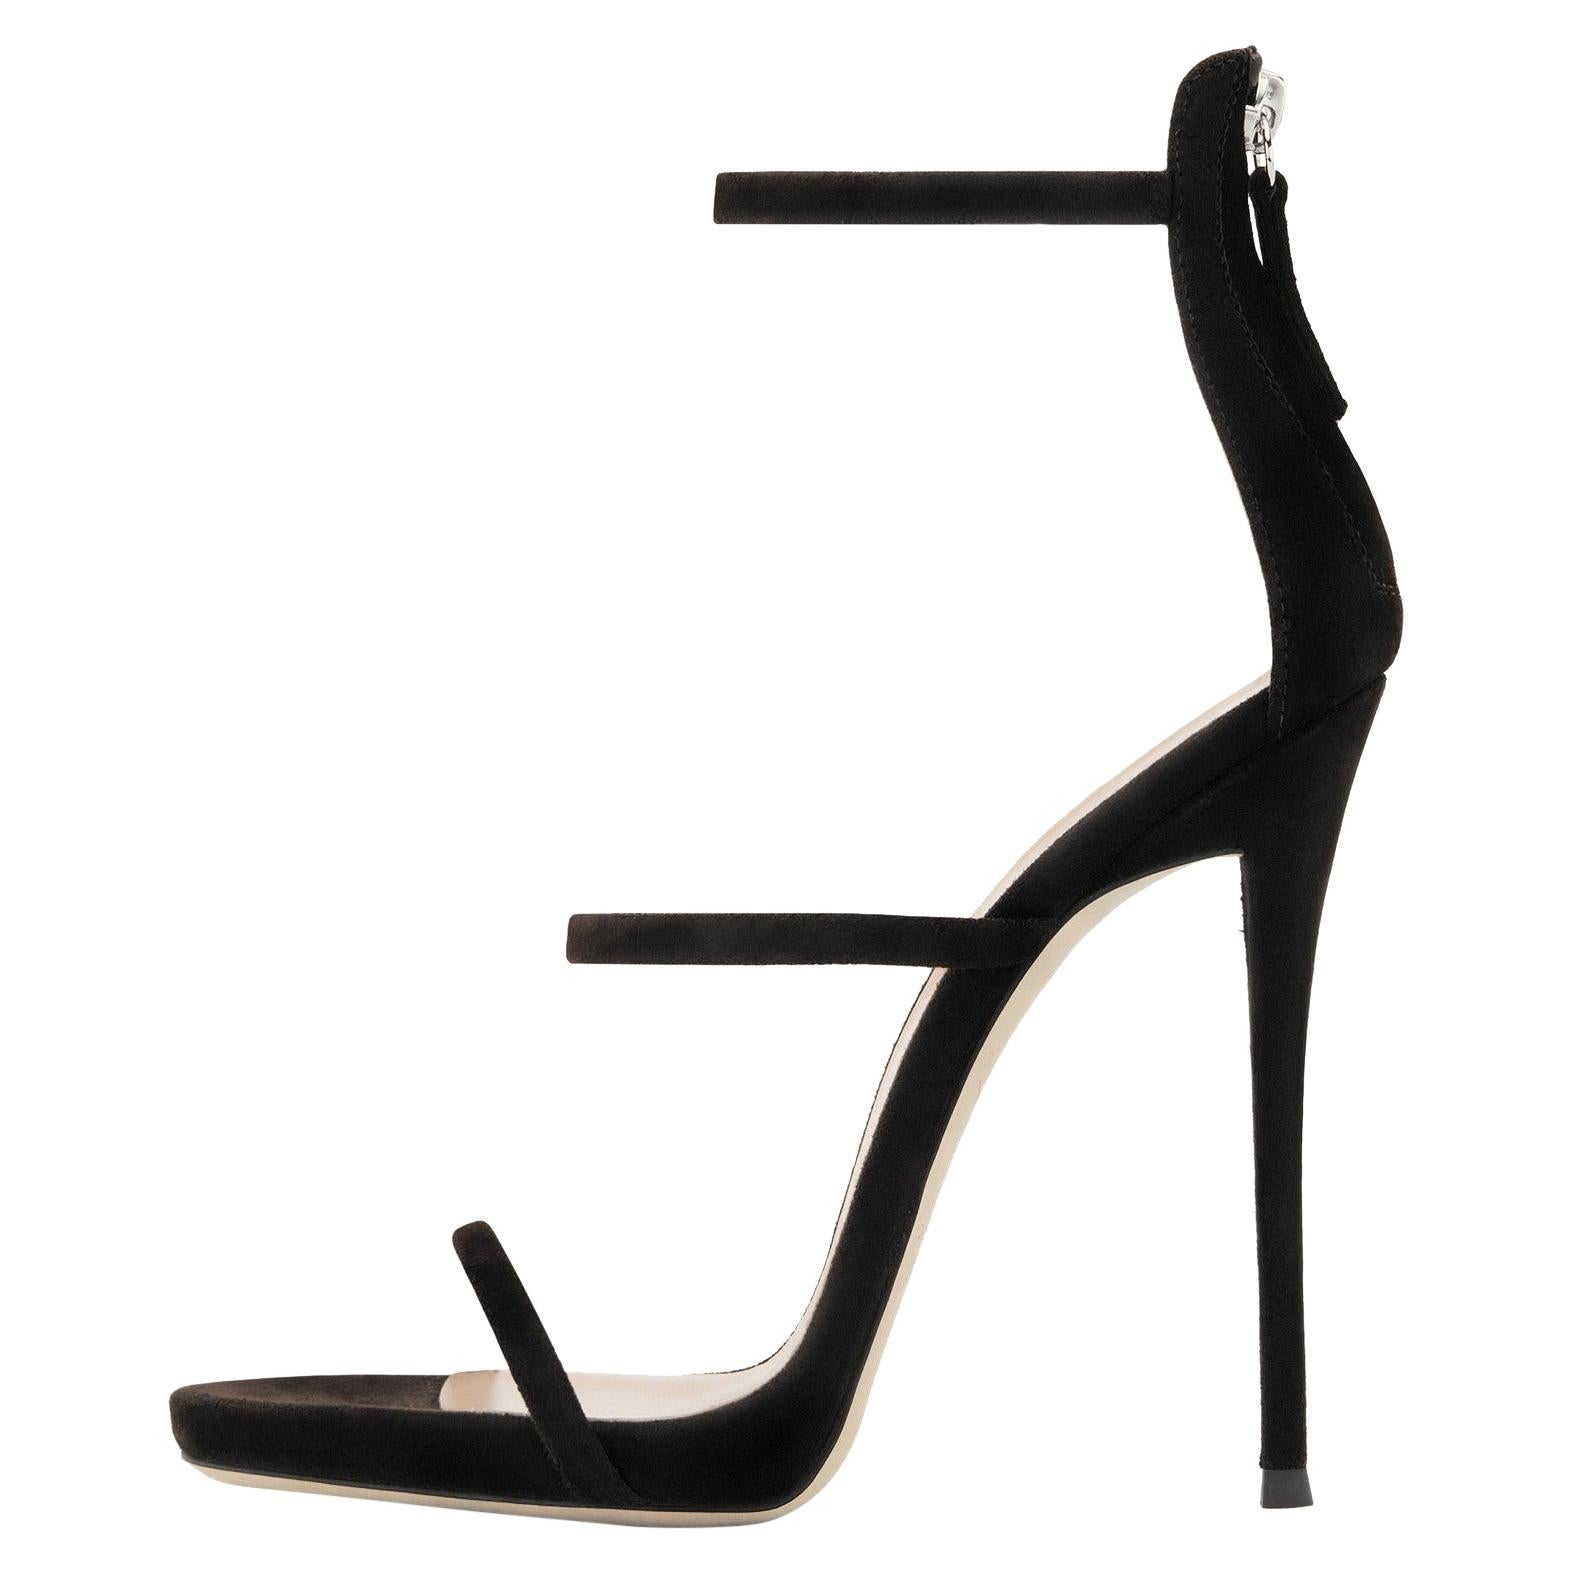 Giuseppe Zanotti NEW Black Suede Strappy Evening Sandals Heels in Box (IT 41)